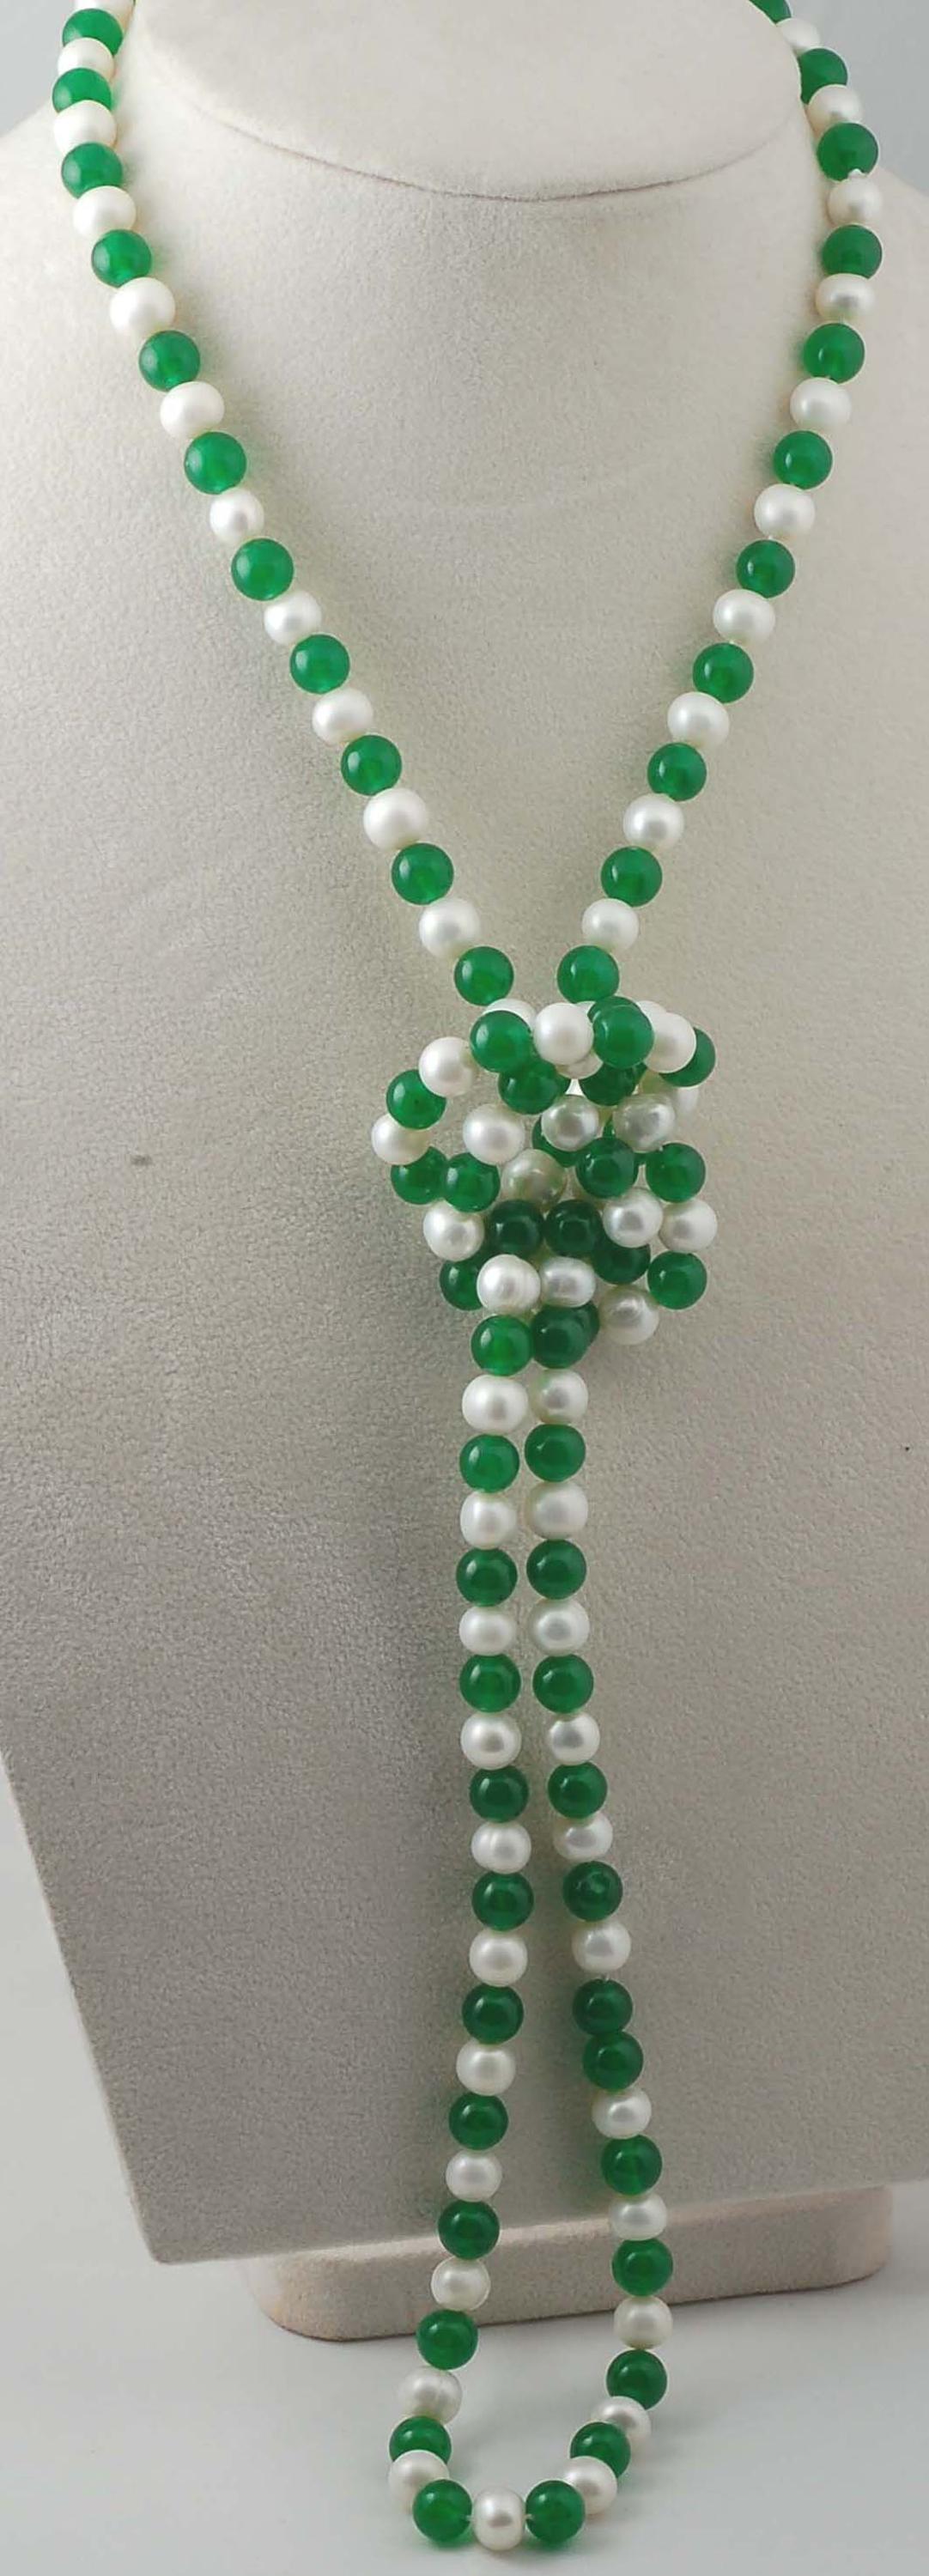 Freshwater Pearl And Green Jade  Round 8Mm Necklace 45Inch  Wholesale Nature Beads Fppj Gemstone